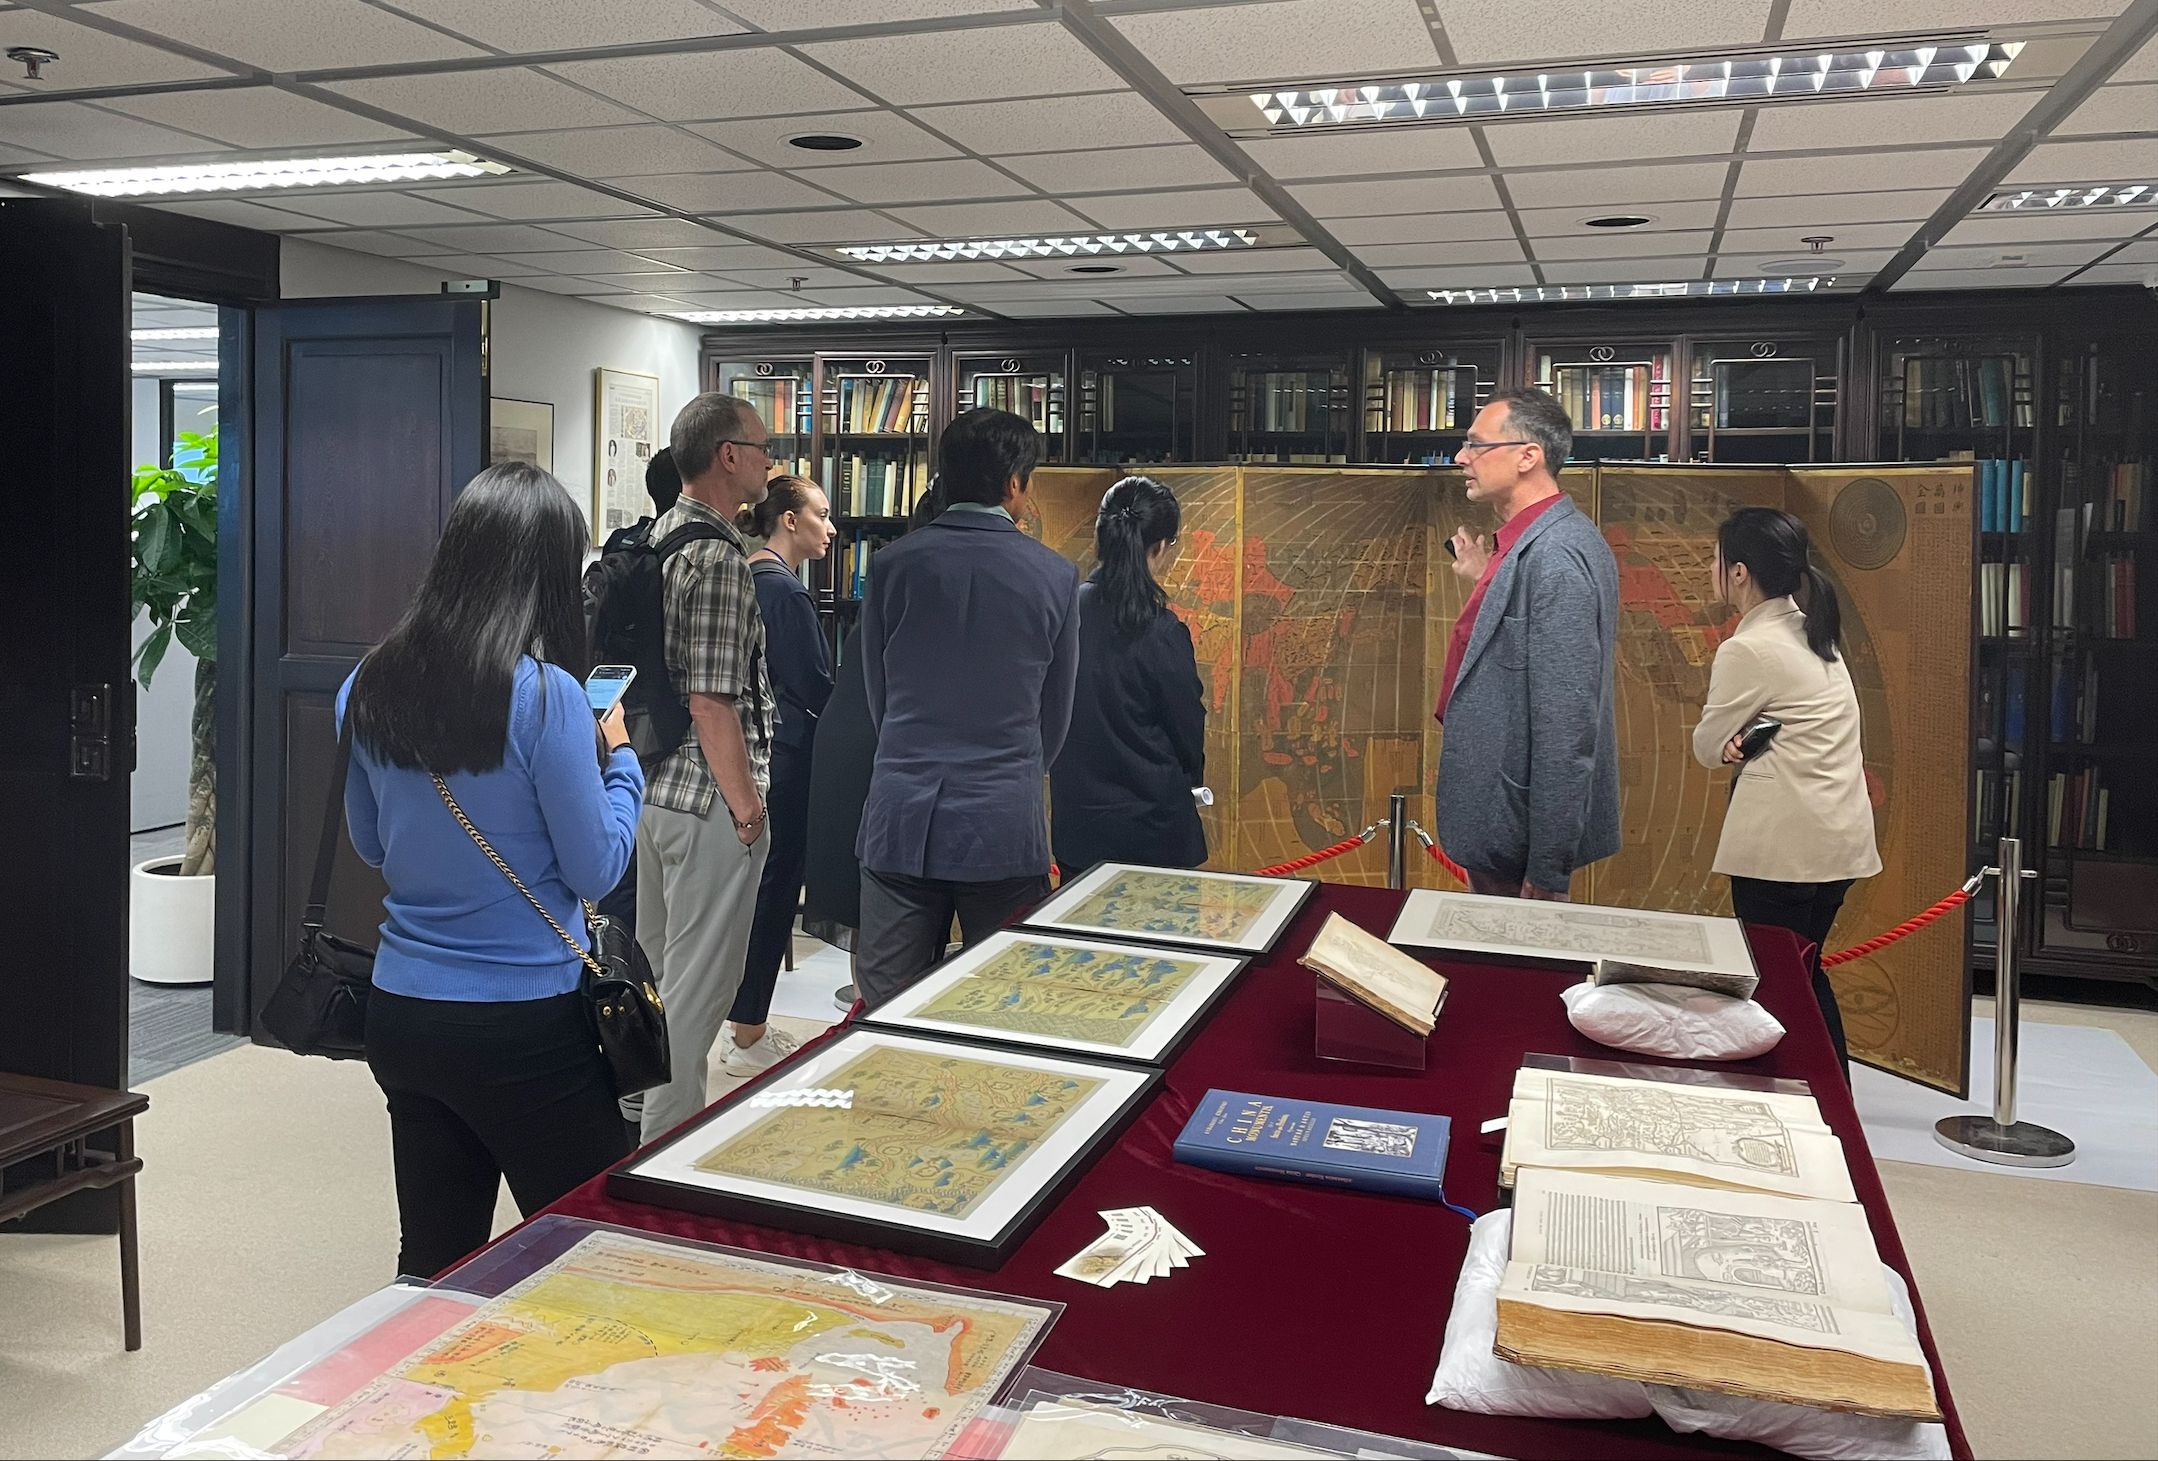 Dr. Marco CABOARA, Manager (Digital Scholarship & Archives) at HKUST Lee Shau Kee Library (second right), leads a tour to introduce the University’s library collection of antique maps.